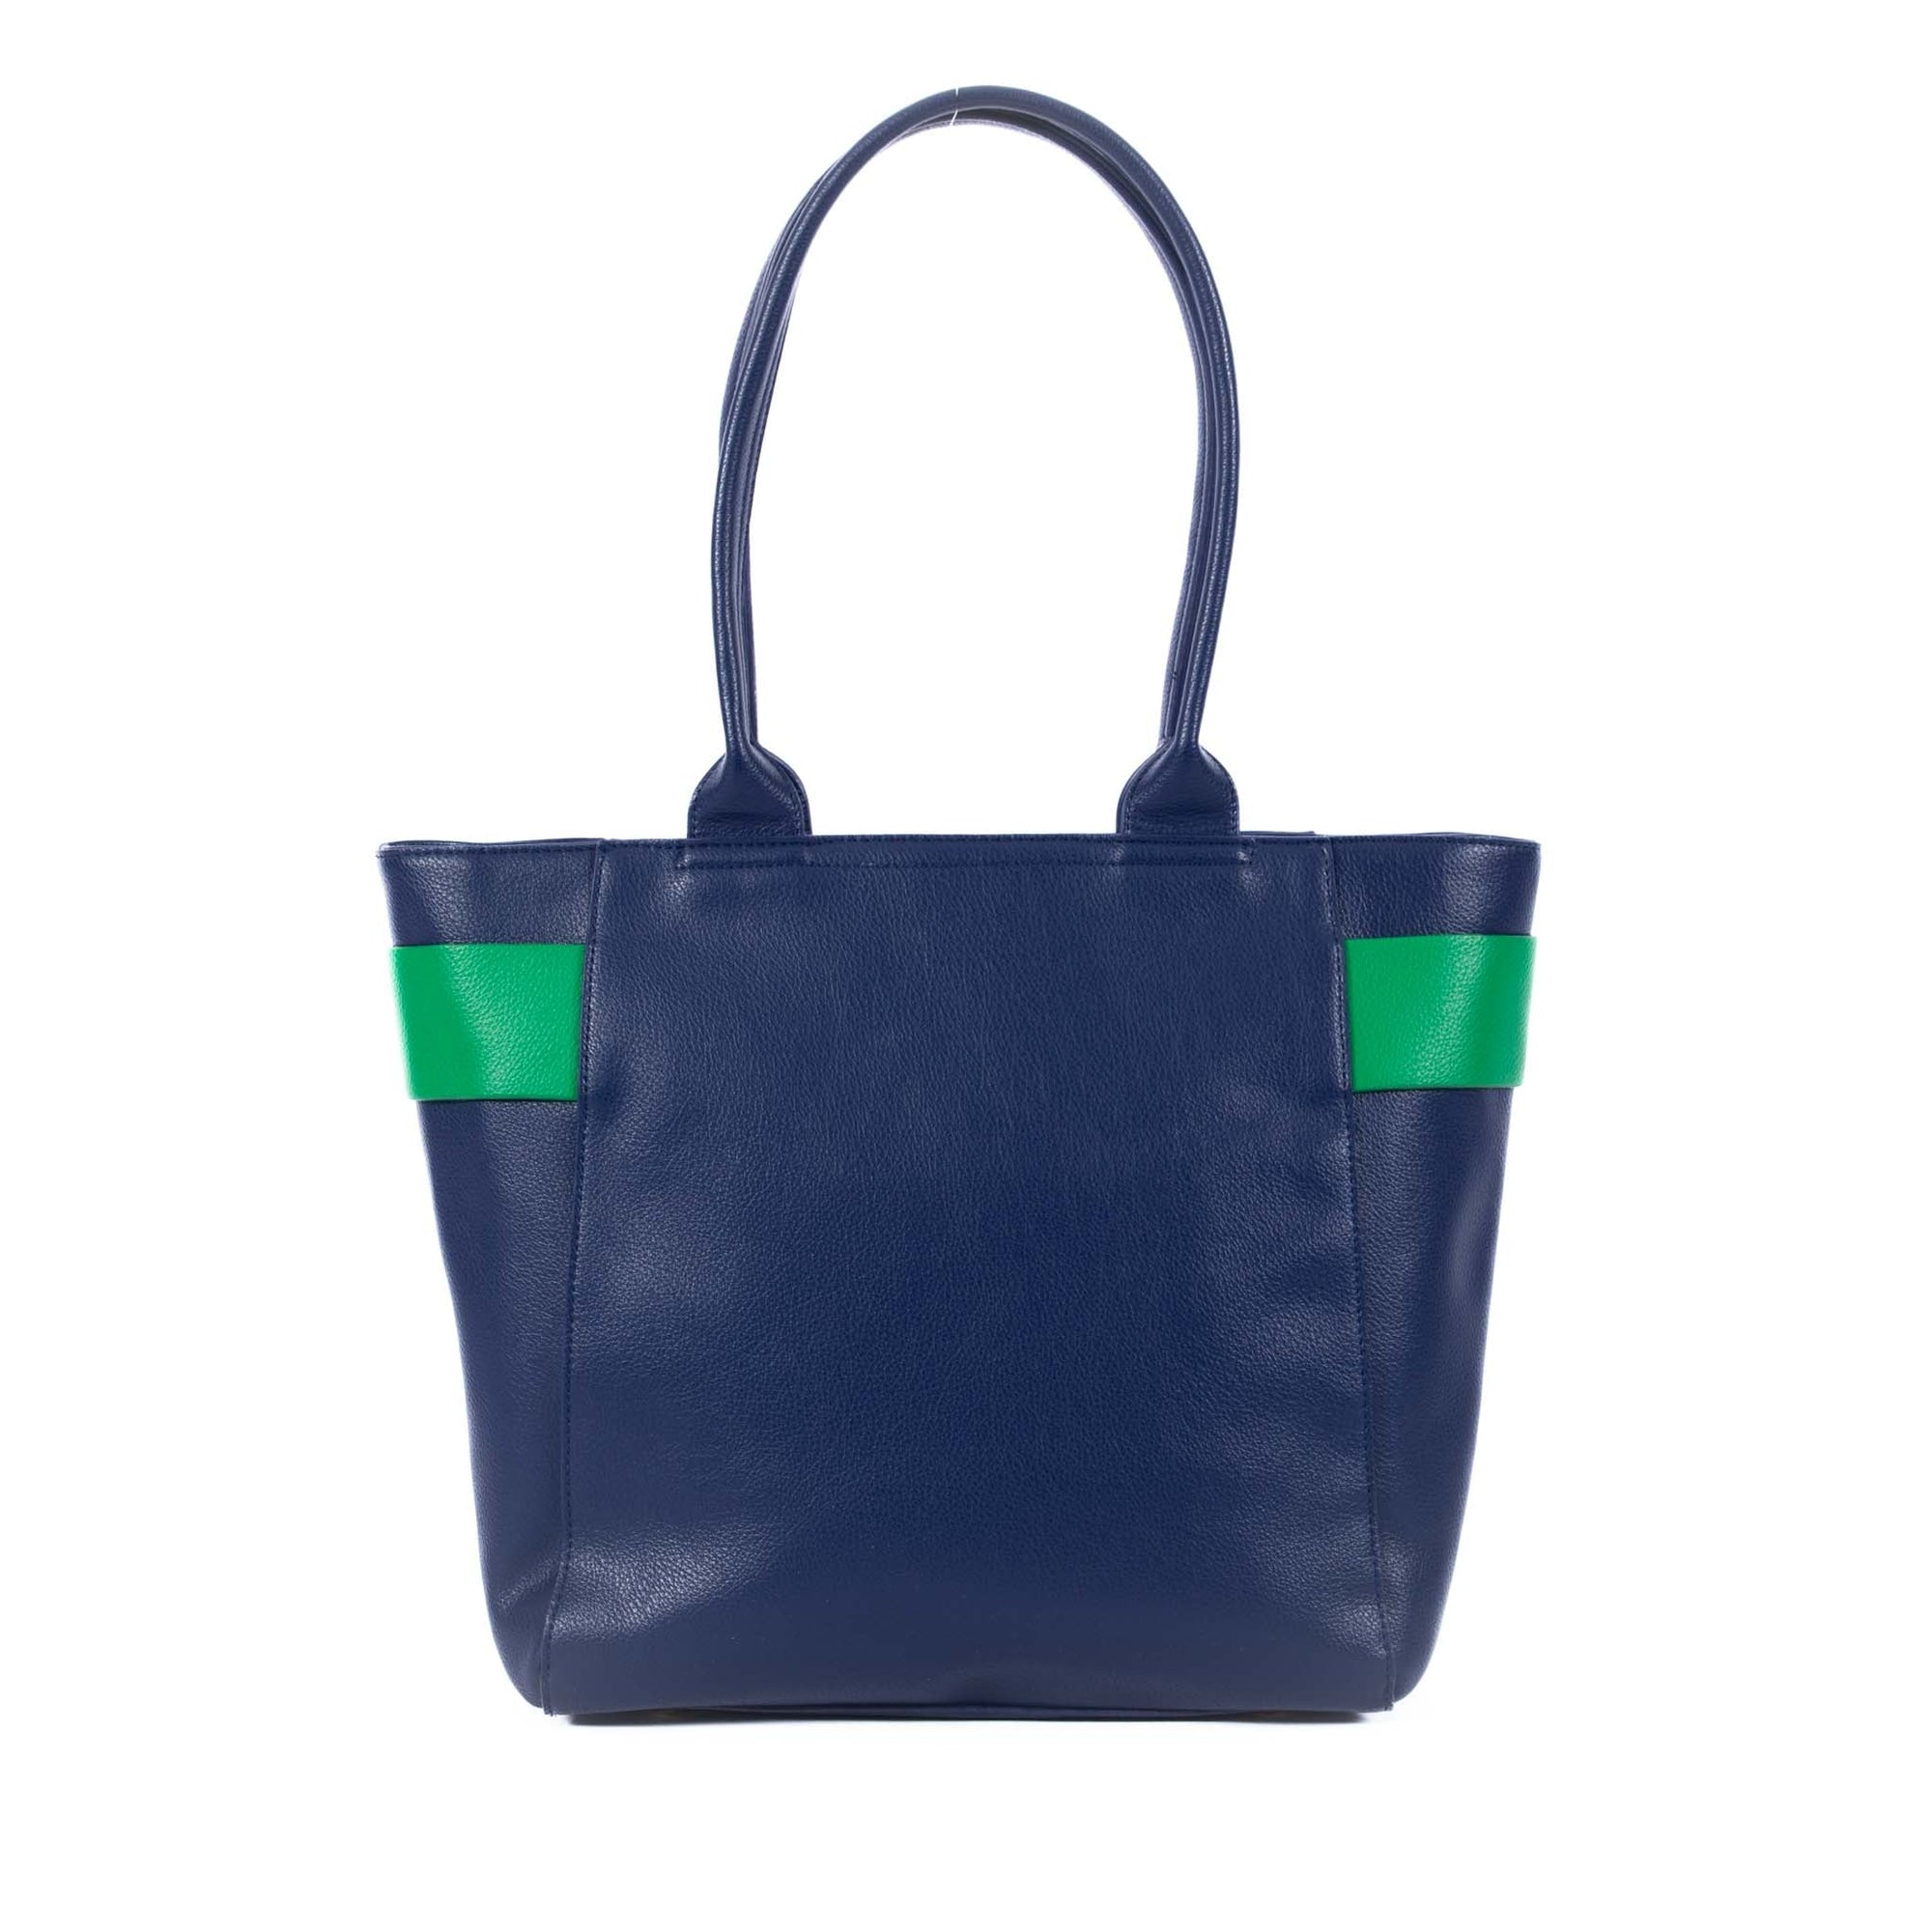 Mill & Hide - Liv & Milly - Chloe - Navy with Green Bow